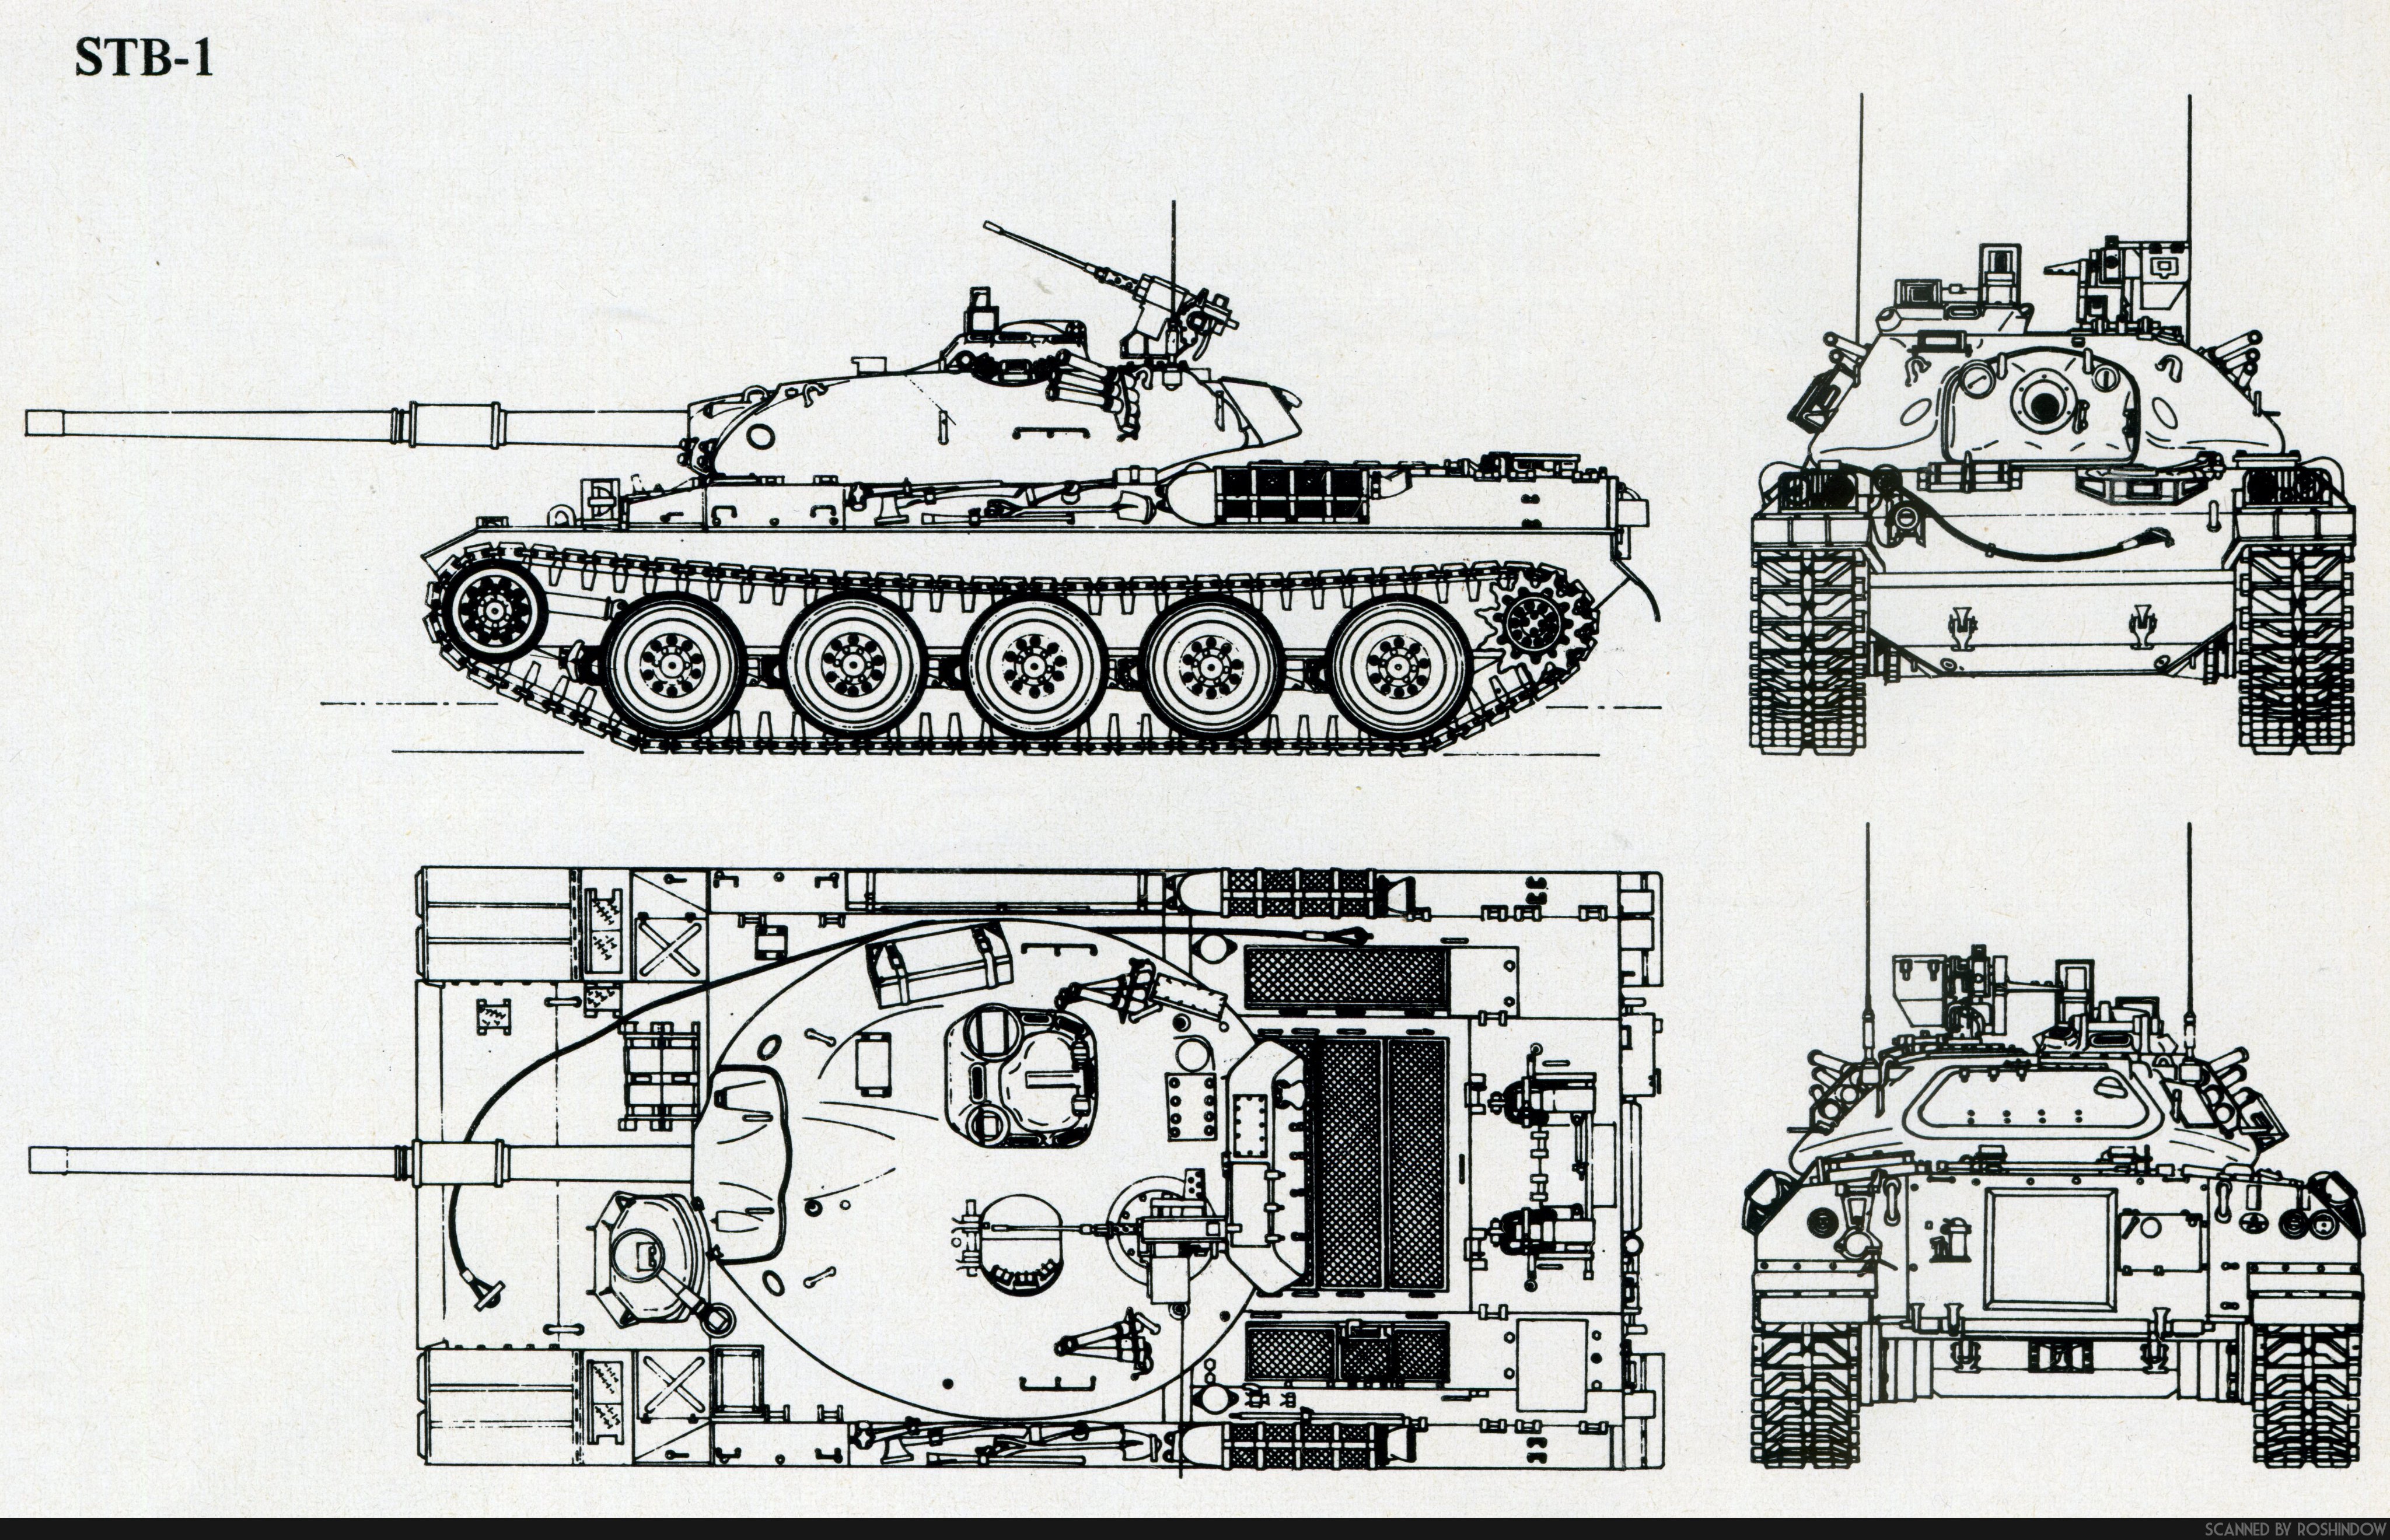 marioneta Maravilloso Capitán Brie Enrico Micheli - Roshindow Twitterren: "And finally comparison drawings  between STB-1 and STB-3. While published in "Eserciti e Army" these  drawings come from the Japanese magazine "Panzer", which I do not posses,